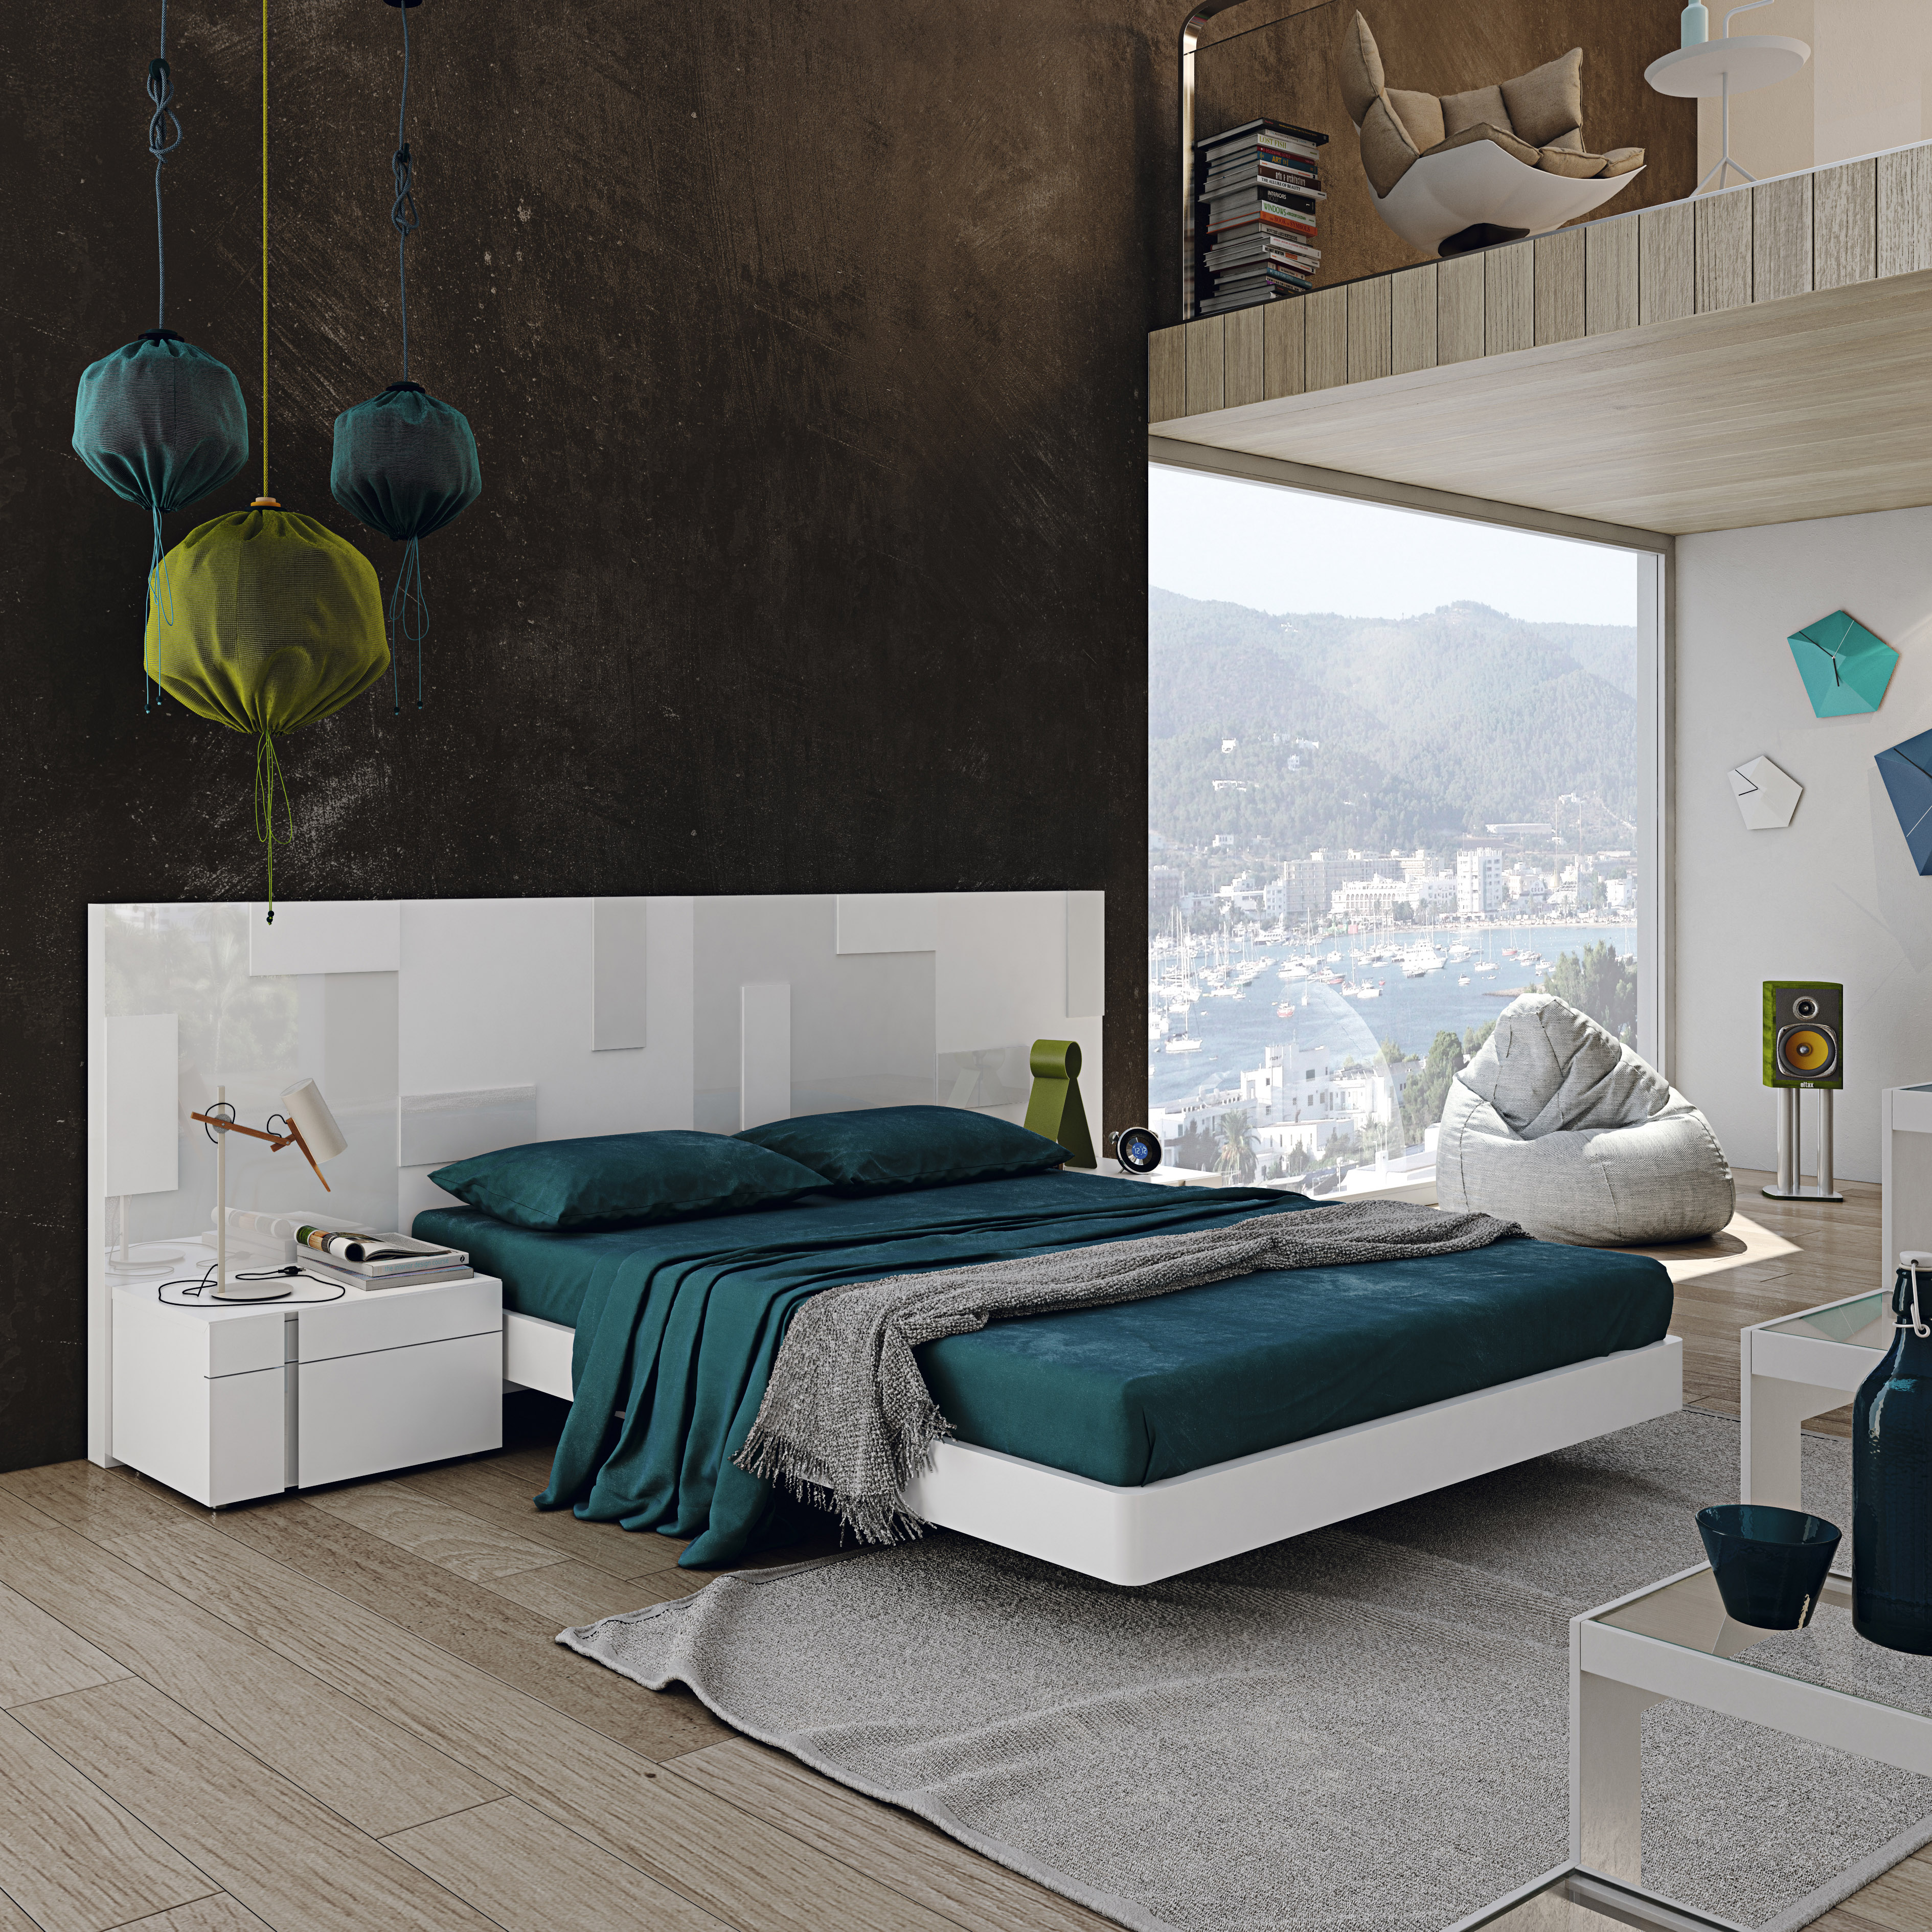 Lacquered Stylish Wood Platform and Headboard Bed